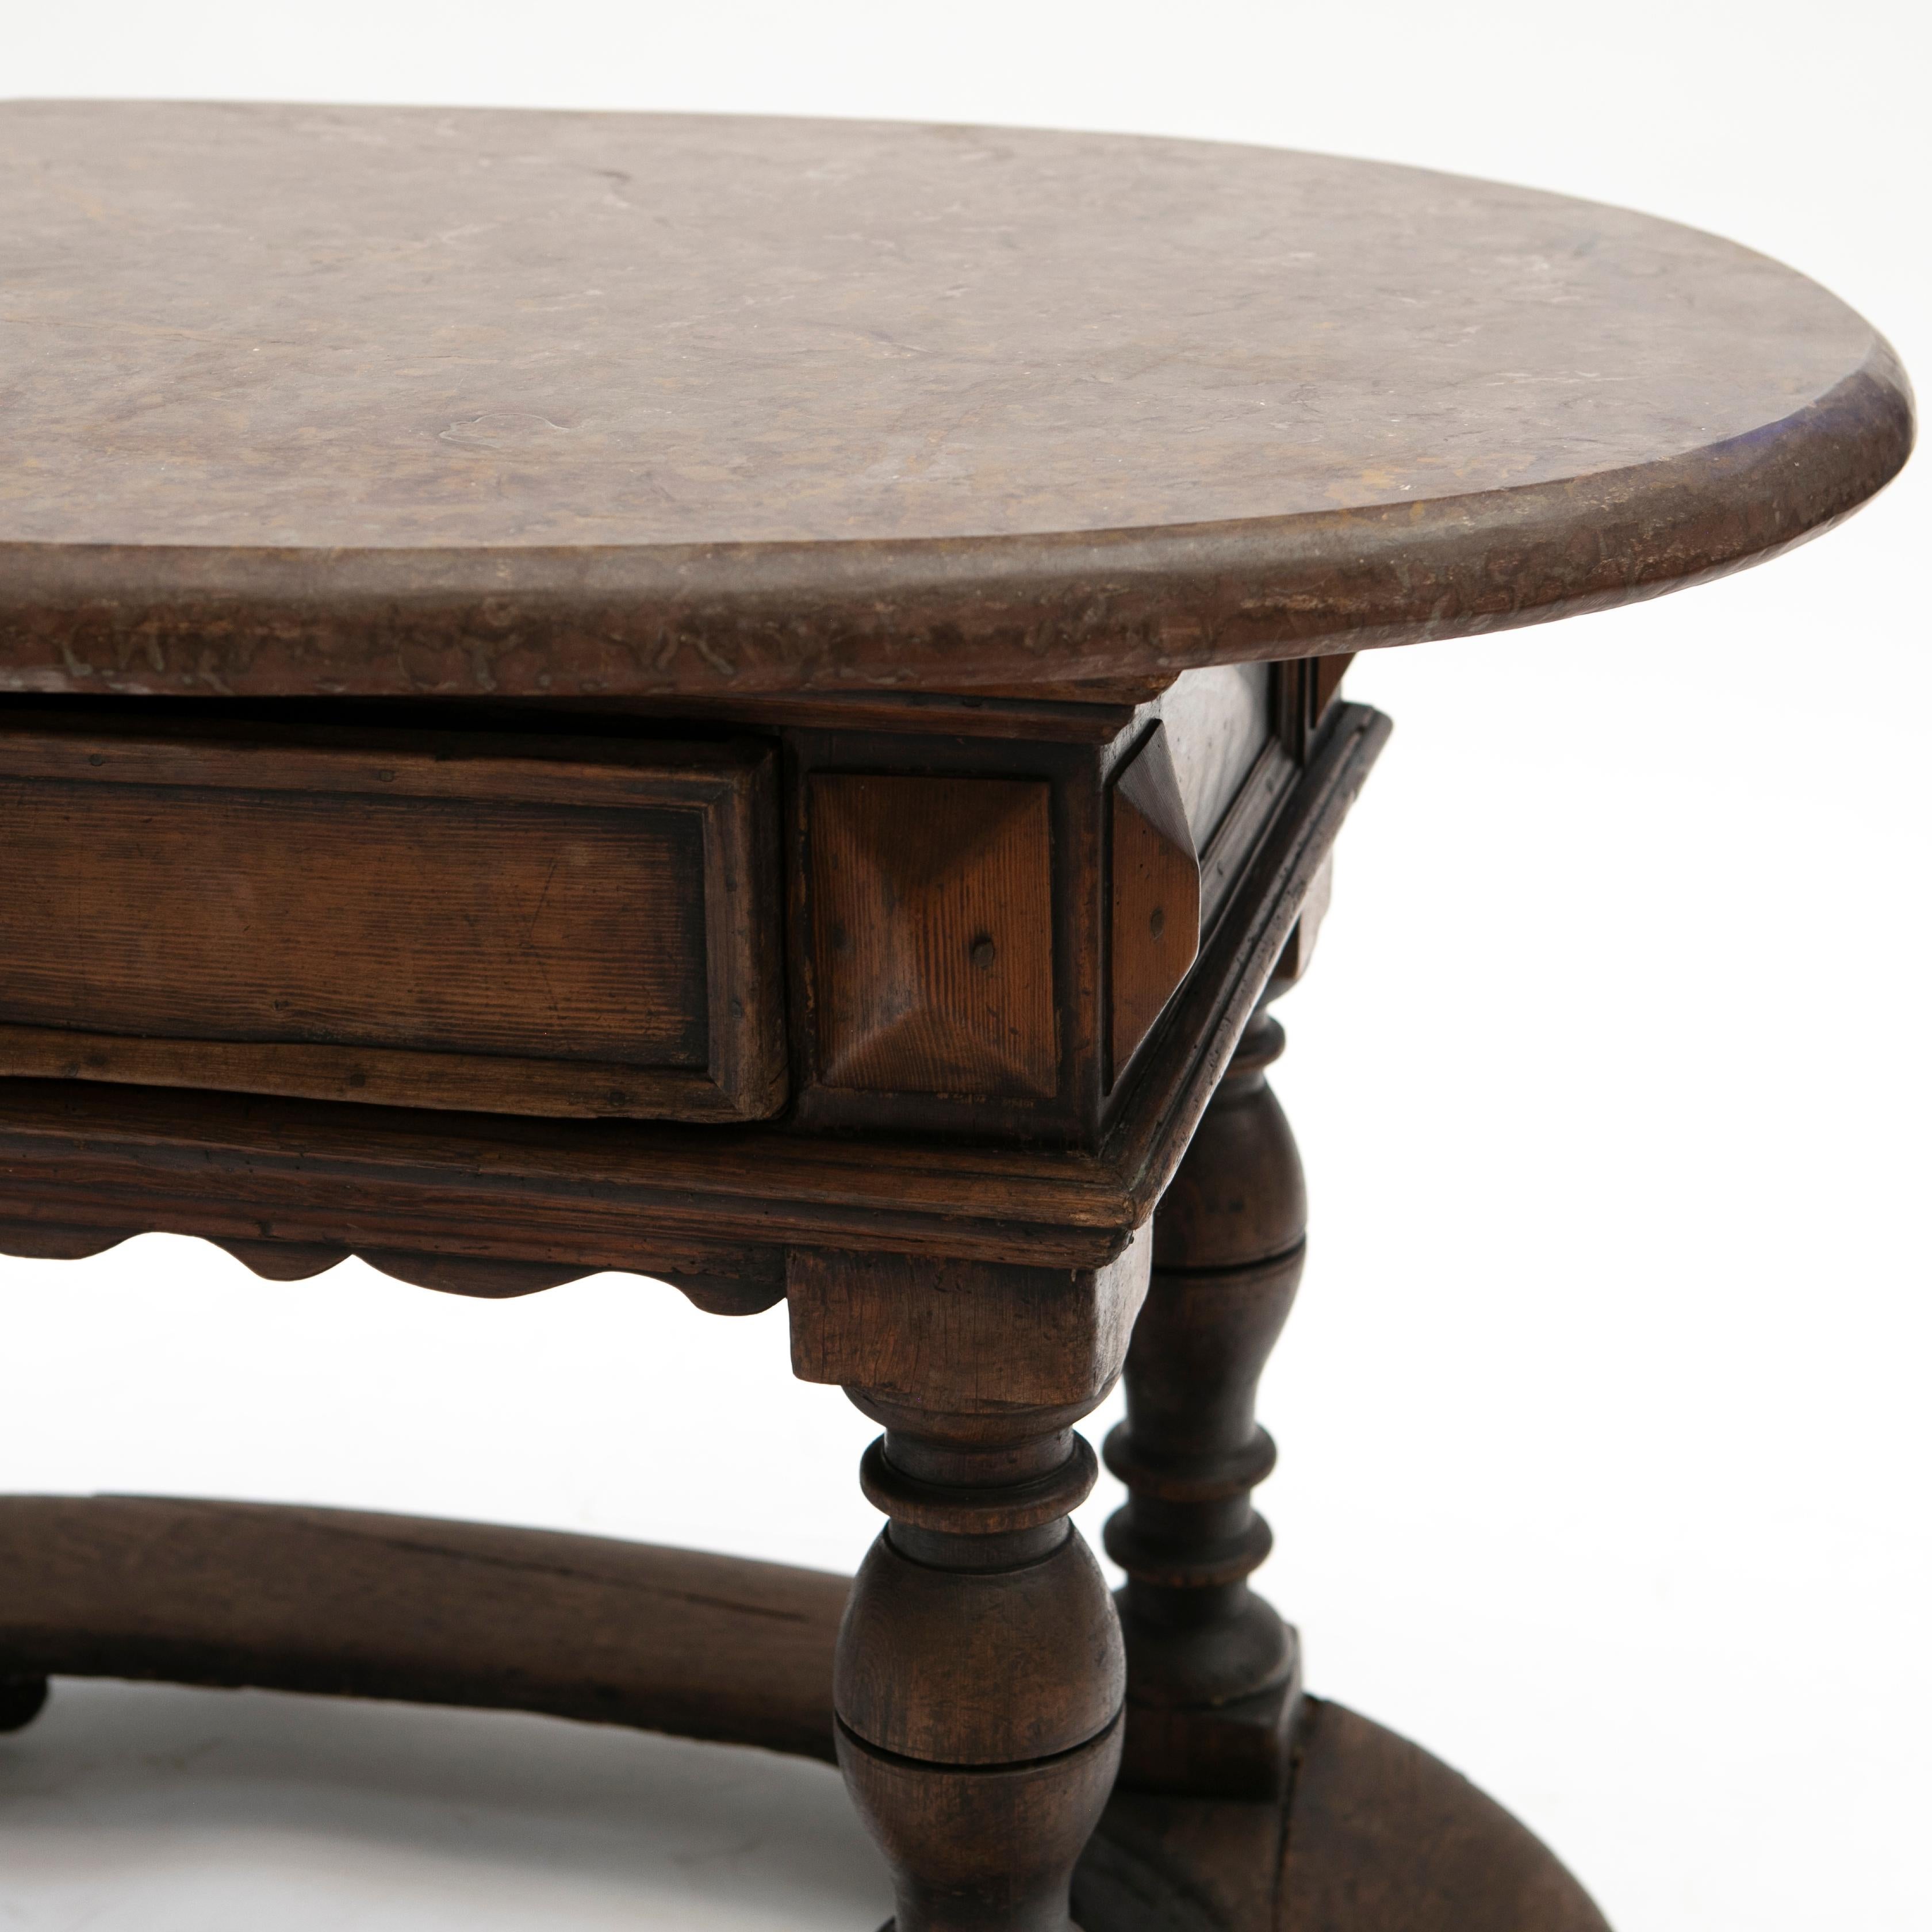 Oval Swedish Baroque Table / Center table. Oak with Fossil Limestone Top In Good Condition For Sale In Kastrup, DK